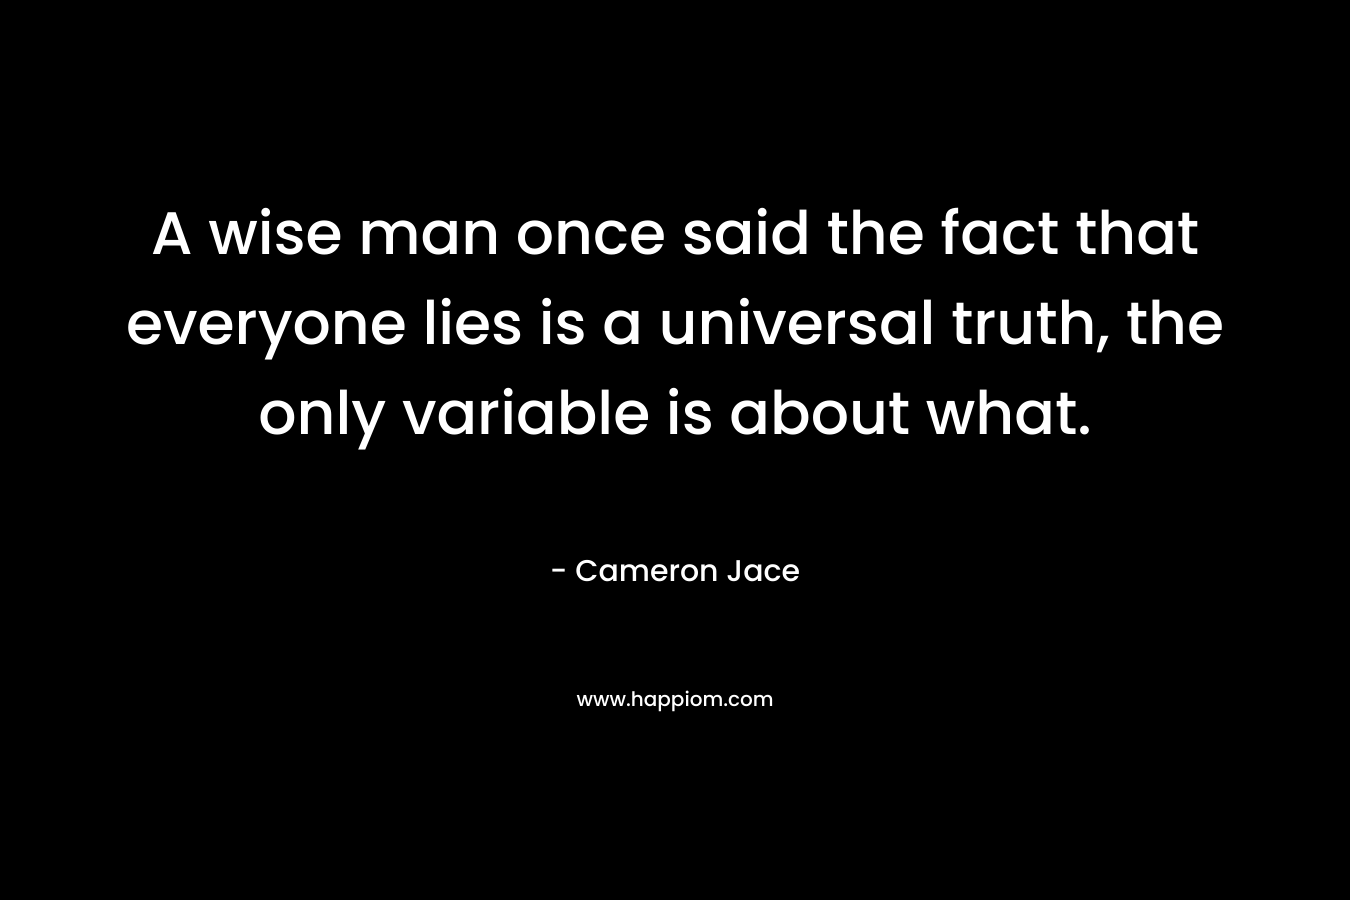 A wise man once said the fact that everyone lies is a universal truth, the only variable is about what.